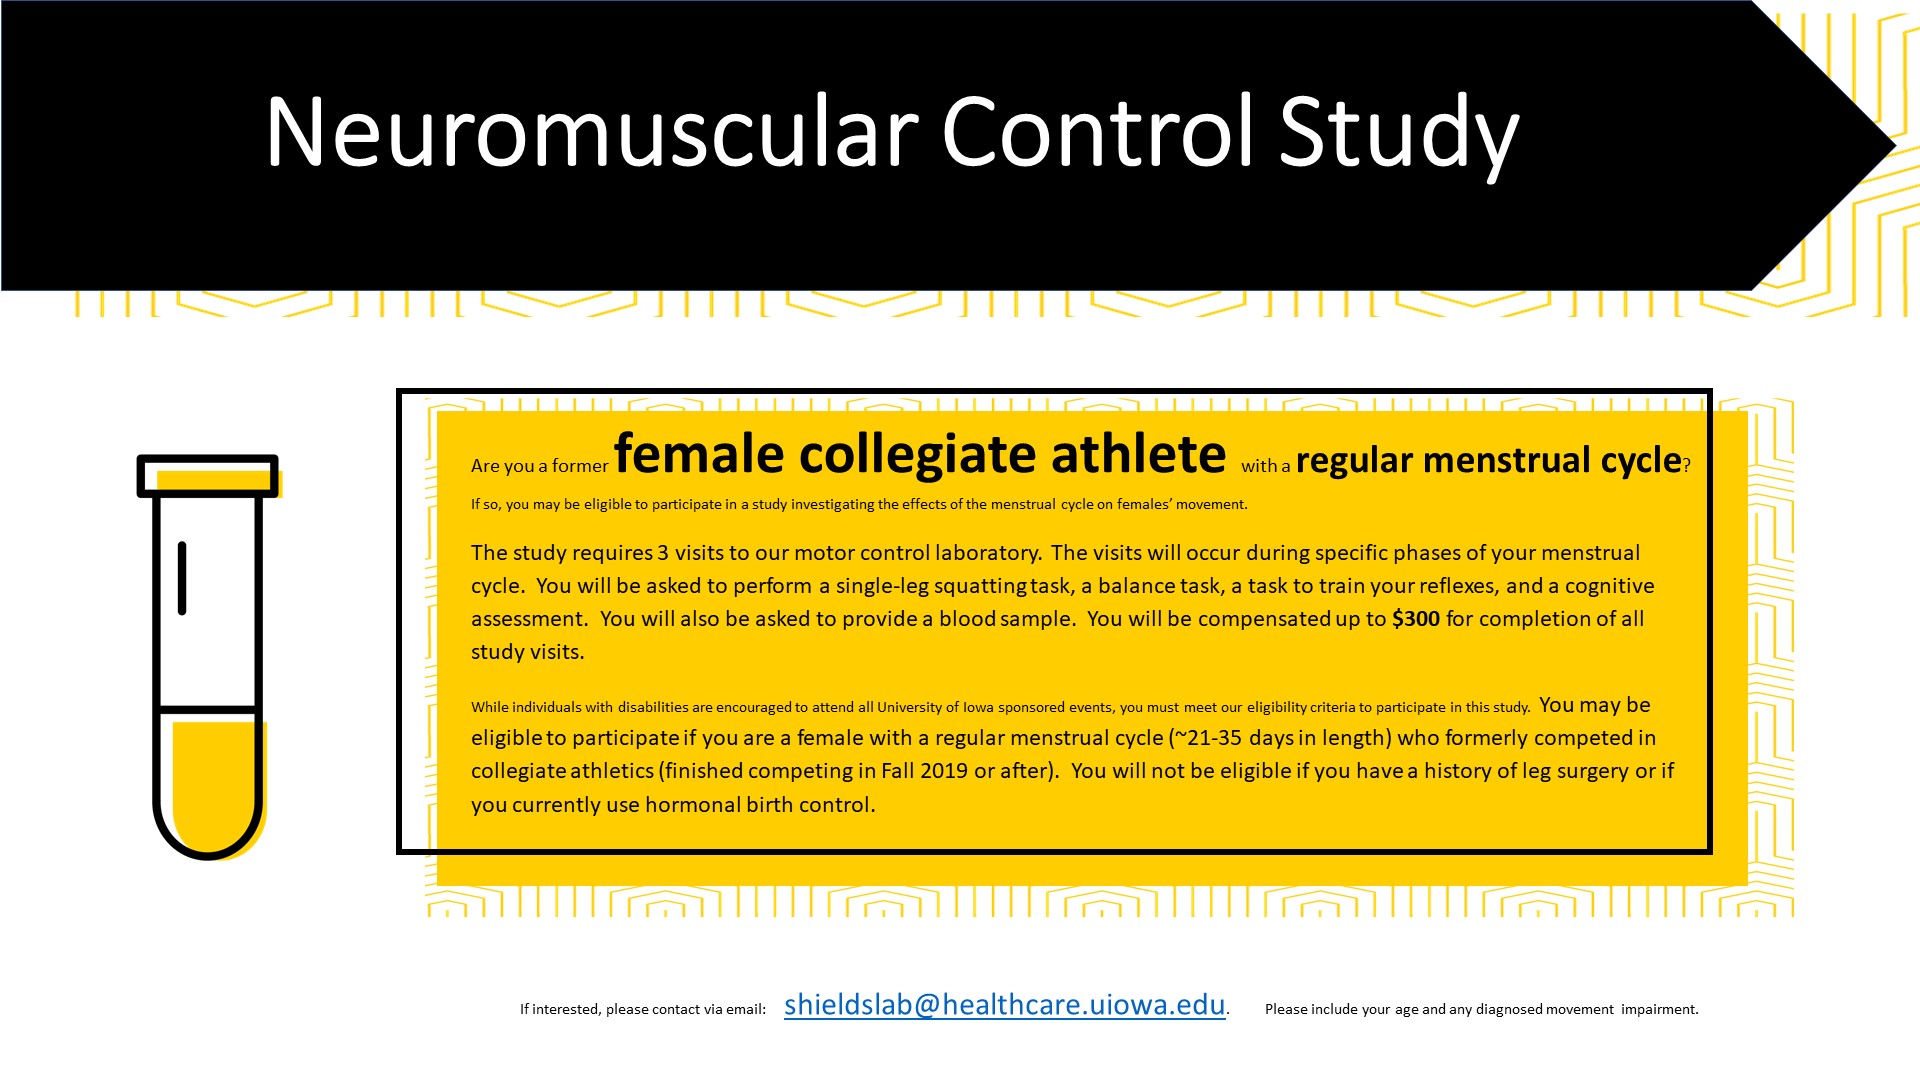 Neuromuscular Control Study Are you a former female collegiate athlete with a regular menstrual cycle? If so, you may be eligible to participate in a study investigating the effects of menstrual cycle on females' movement. The study requires 3 visits to our motor control laboratory. The visits will occur during specific phases of your menstrual cycle. You will be asked to perform a single-leg squatting task, a balance task, a task to train your reflexes, and a cognitive assessment. You will also be asked to provide a blood sample. You will be compensated up to $300 for completion of all study visits. While individuals with disabilities are encourage to attend all University of Iowa events, you must meet our eligibility criteria to participate in this study. You may be eligible to participate if you are a female with a regular menstrual cycle (~21-35 days in length) who formerly competed in collegiate athletics (finished competing in Fall 2019 or after). You will not be eligible if you have a history of leg su